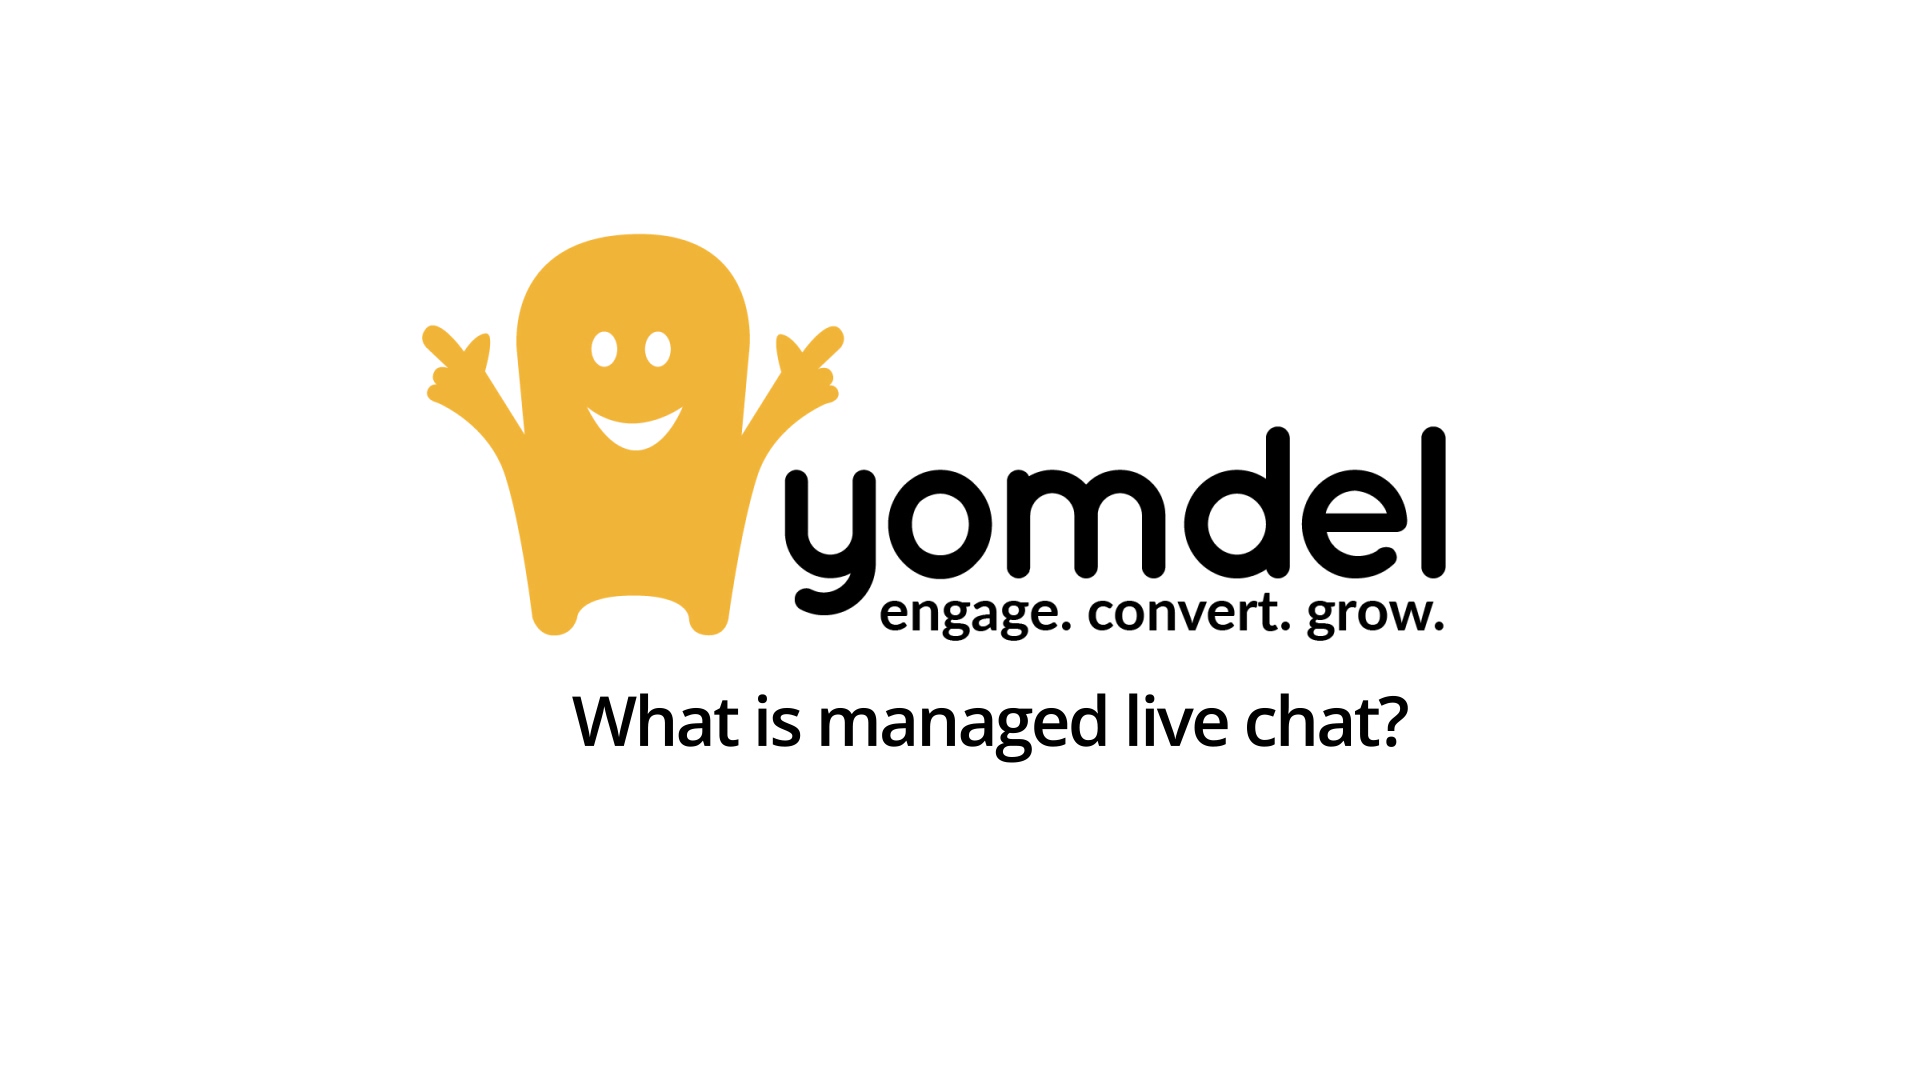 What is Yomdel Live Chat - FINAL